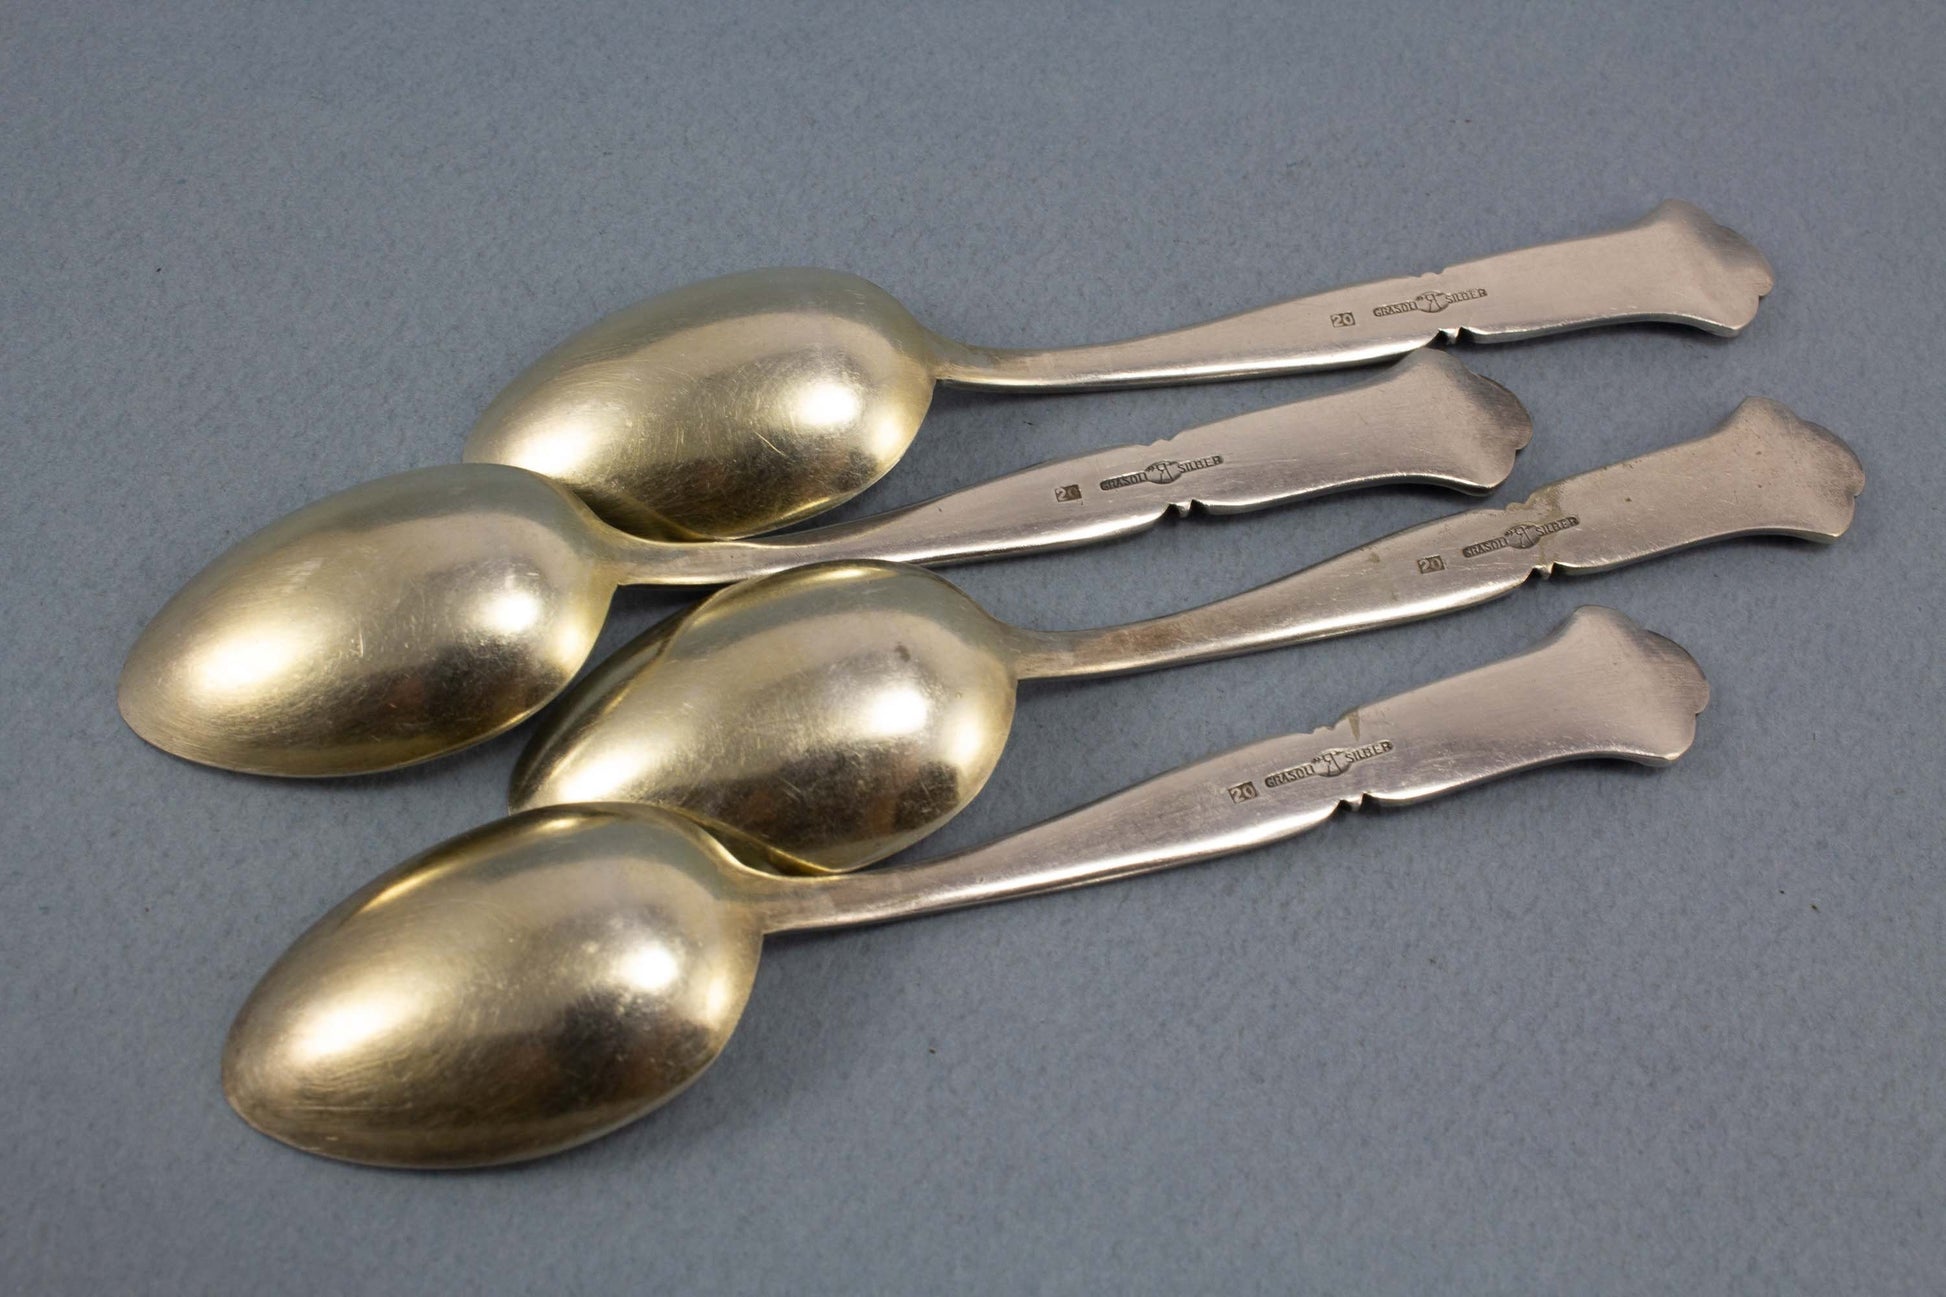 4 mocha spoons from Grasoli, art nouveau, hammered silver plated